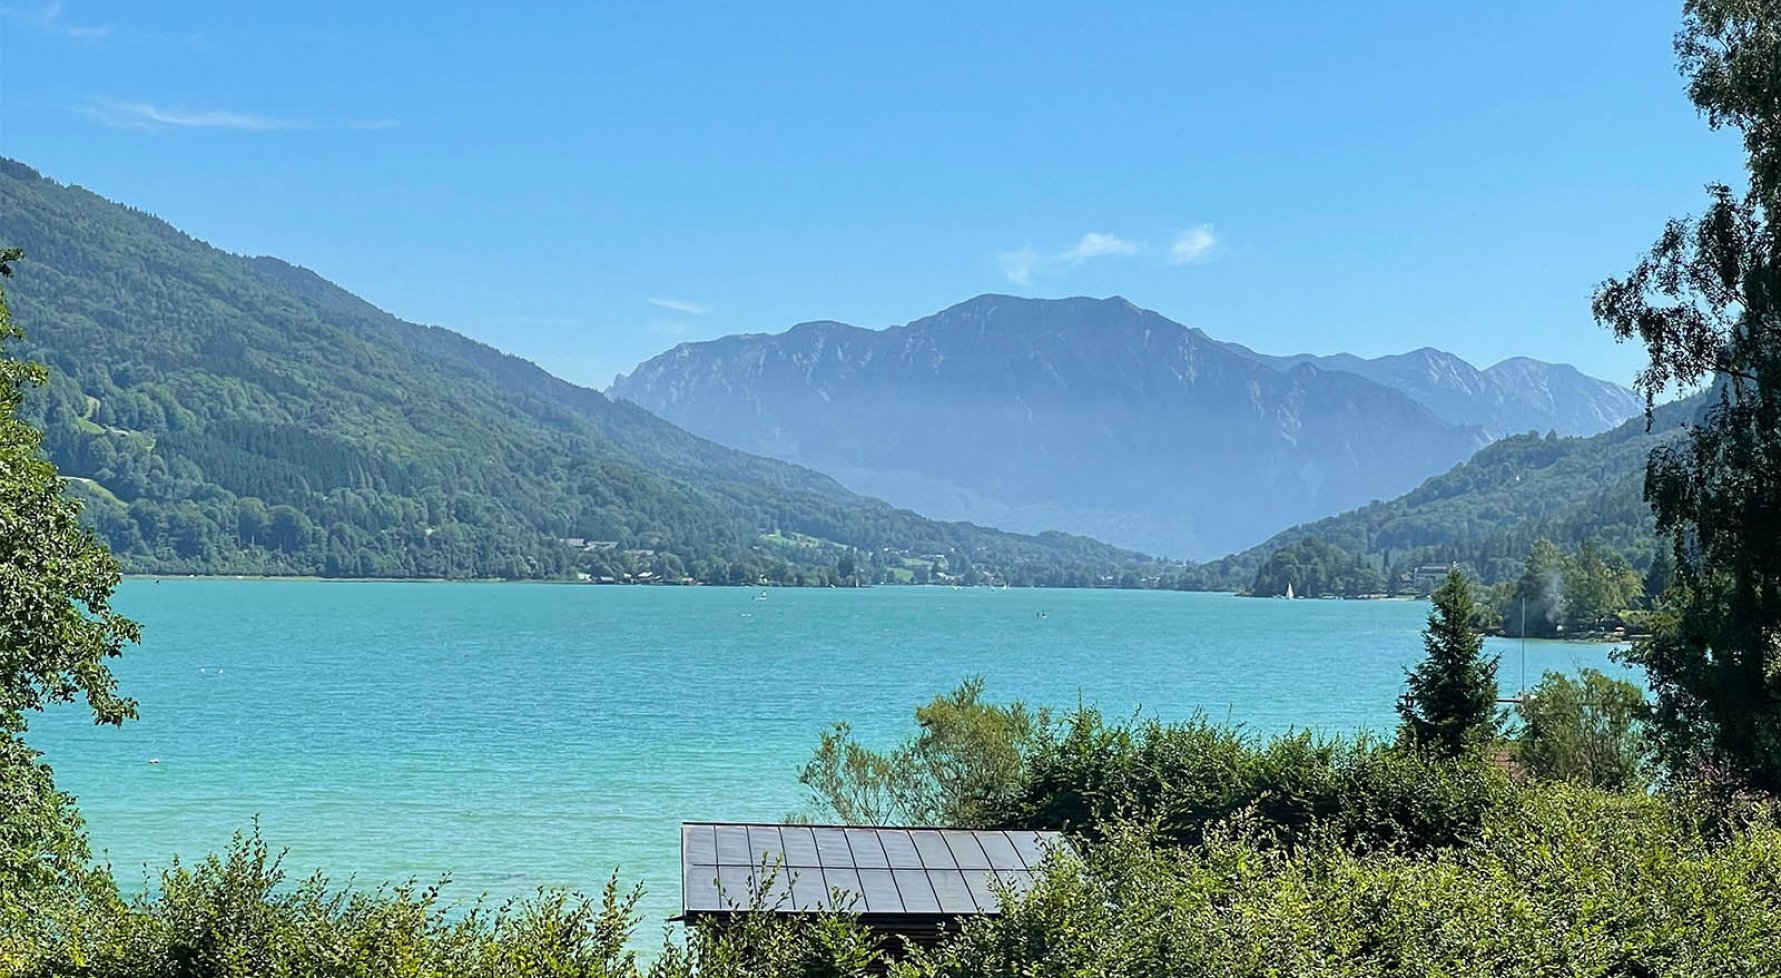 Property in 5310 Sankt Lorenz am Mondsee: YOUR SUNNY PLACE IN MONDSEE! New-build corner house with private swimming spot - picture 1